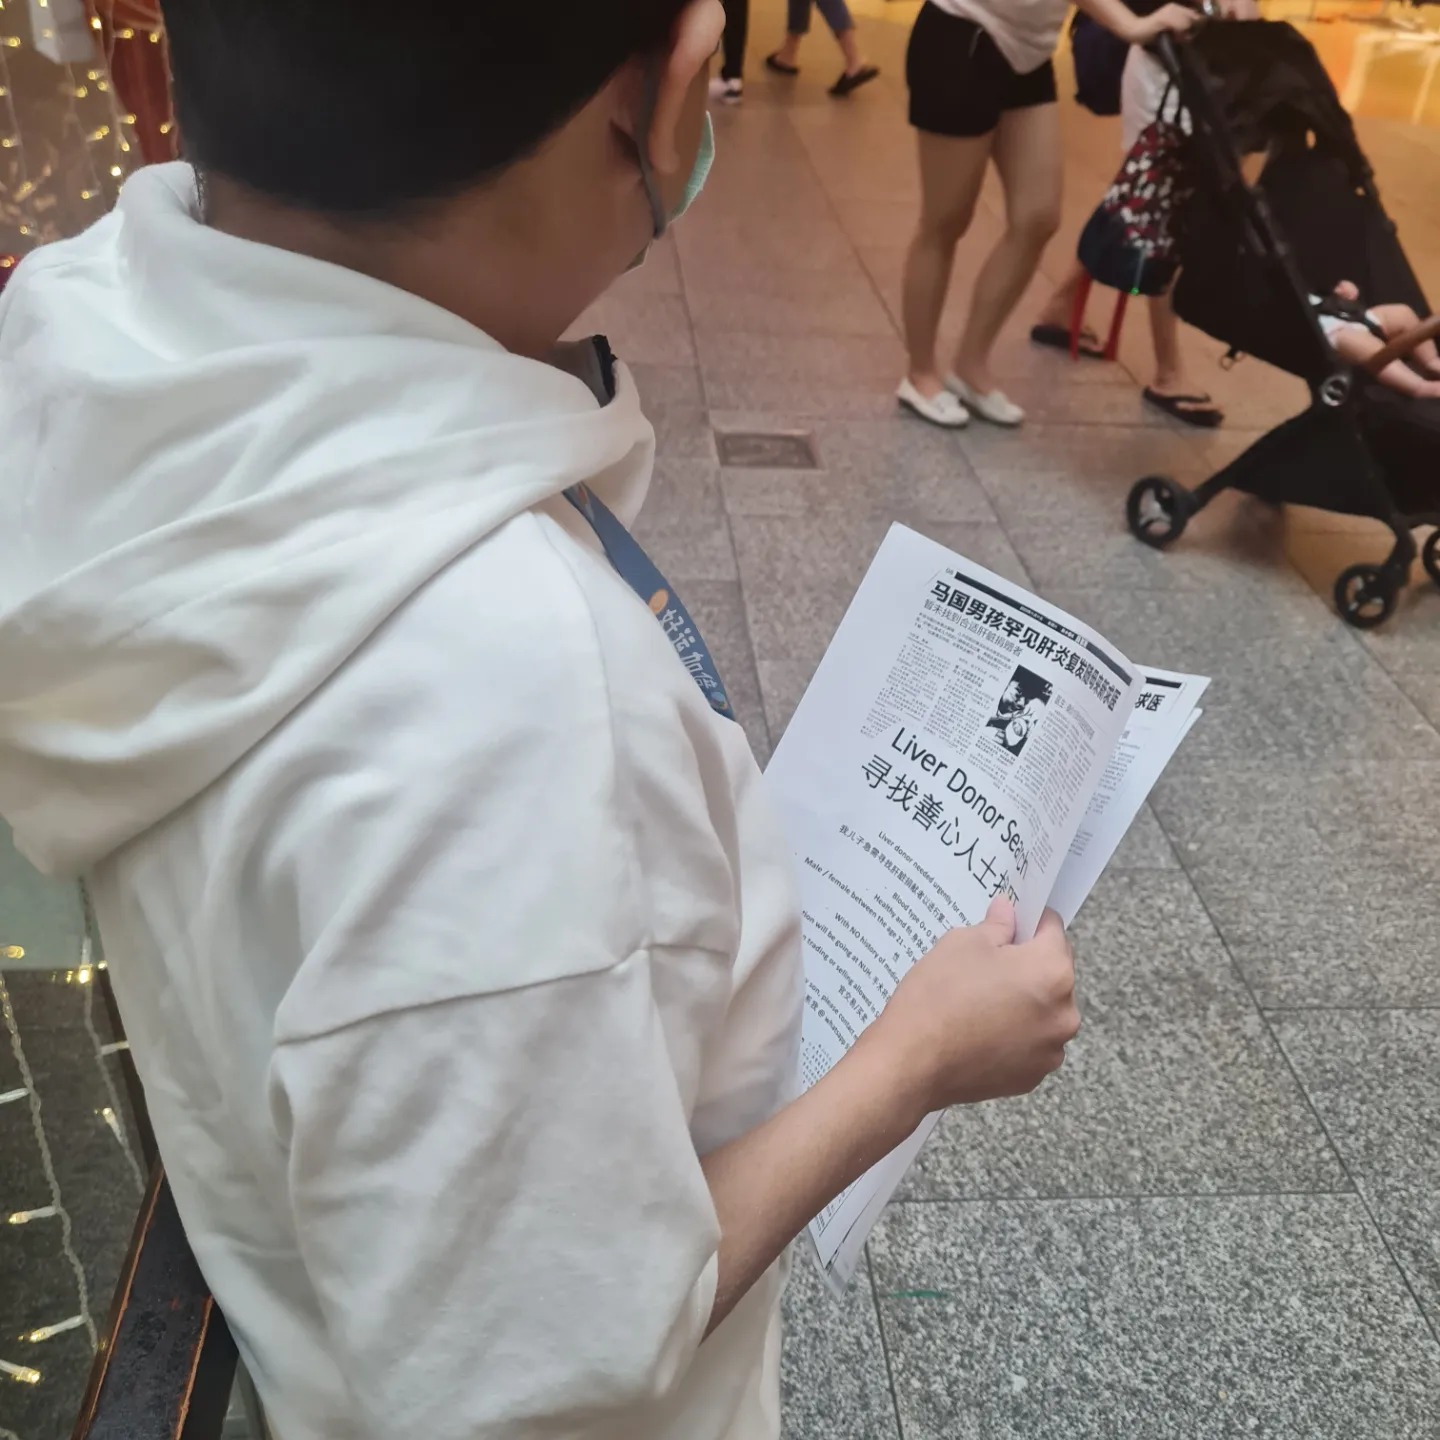 Boon heng giving out flyers